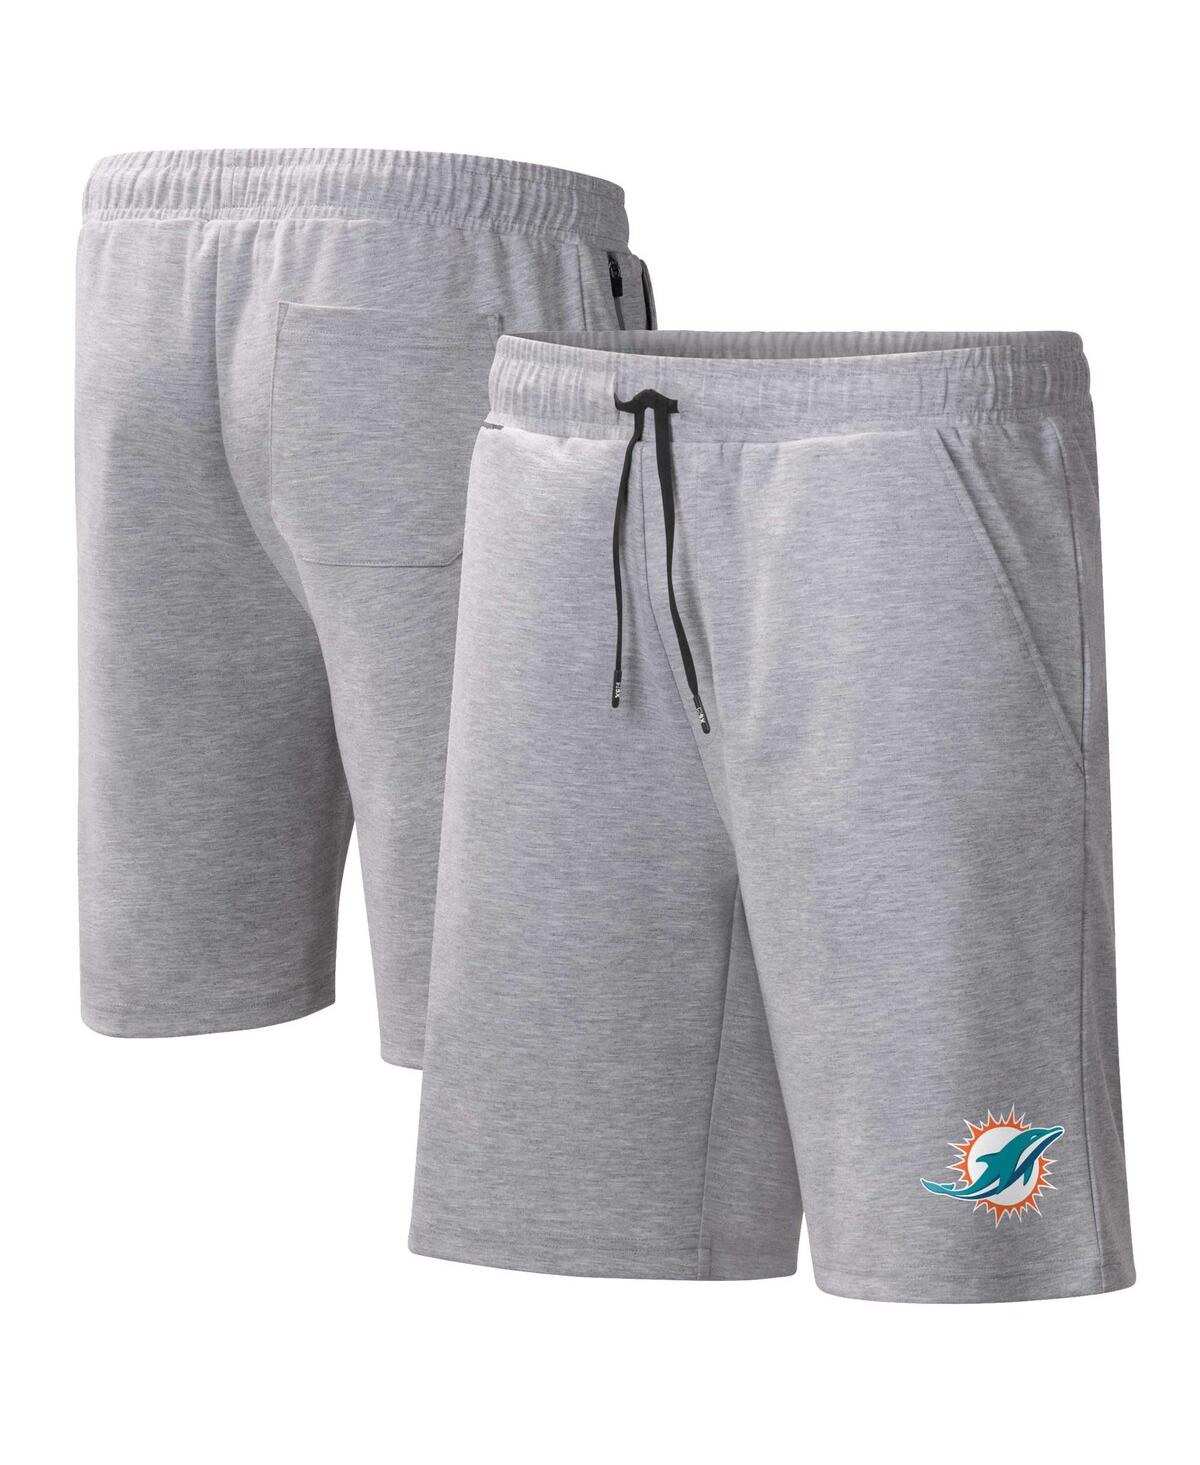 Men's Msx by Michael Strahan Heather Gray Miami Dolphins Trainer Shorts - Heather Gray